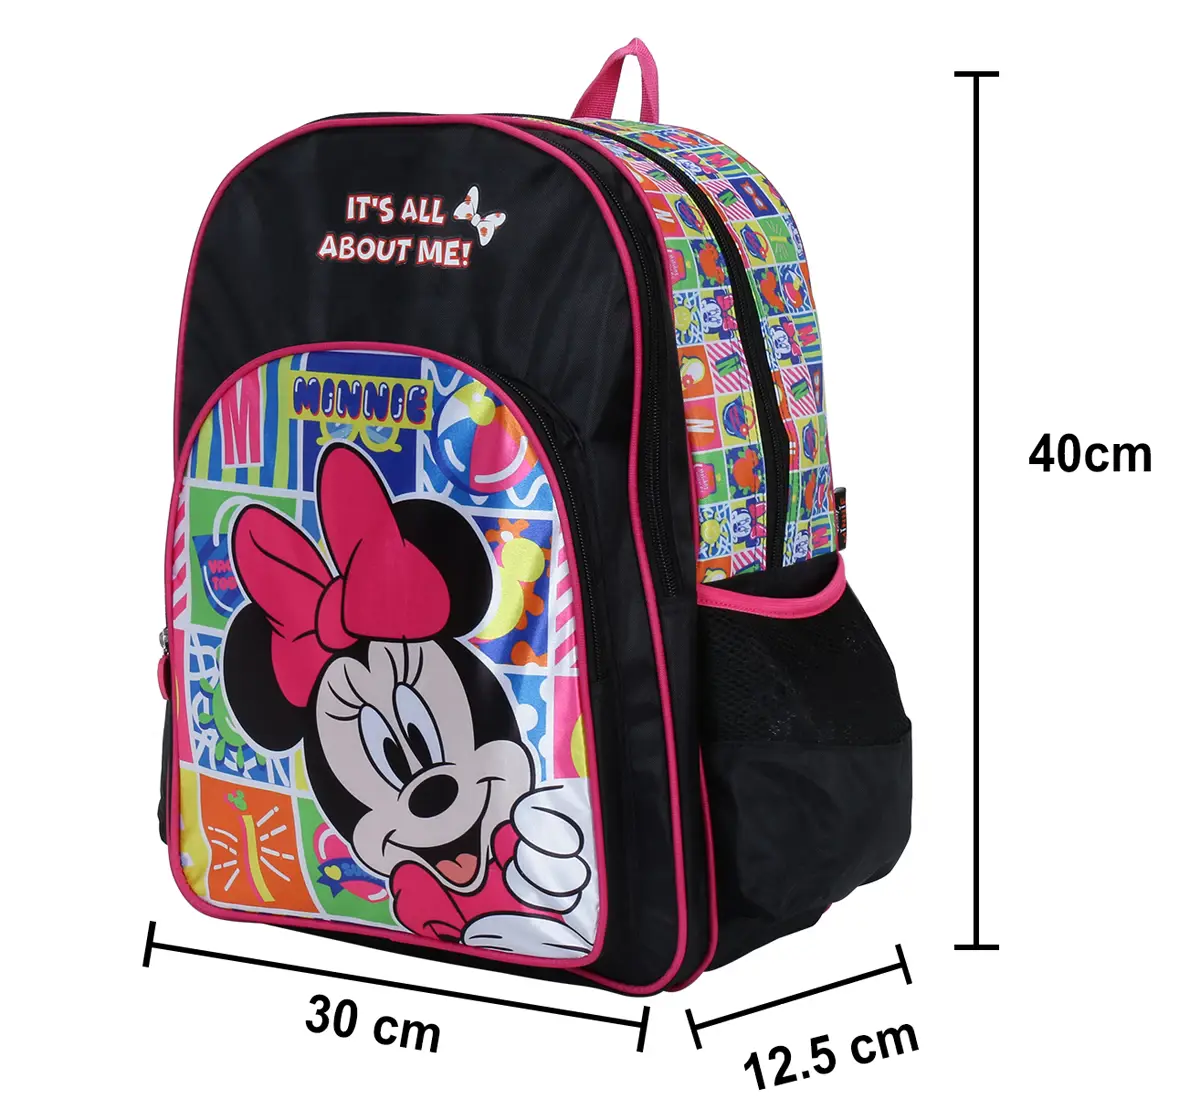 Simba Minnie Proud To Be Me 16 Backpack Multicolor 3Y+